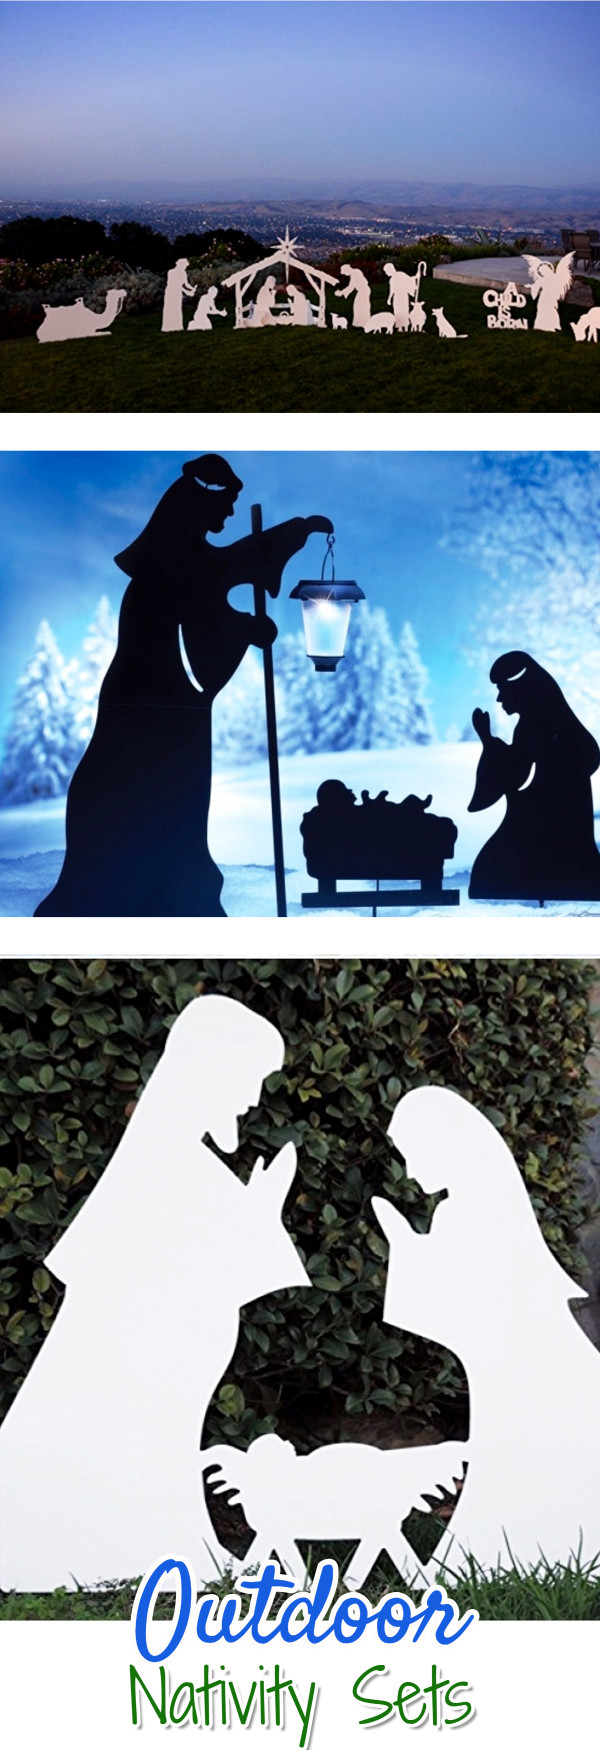 Outdoor Nativity Scene Ideas for Your yard.  Decorate outdoors this Christmas with one of these gorgeous Outdoor Nativity Scenes